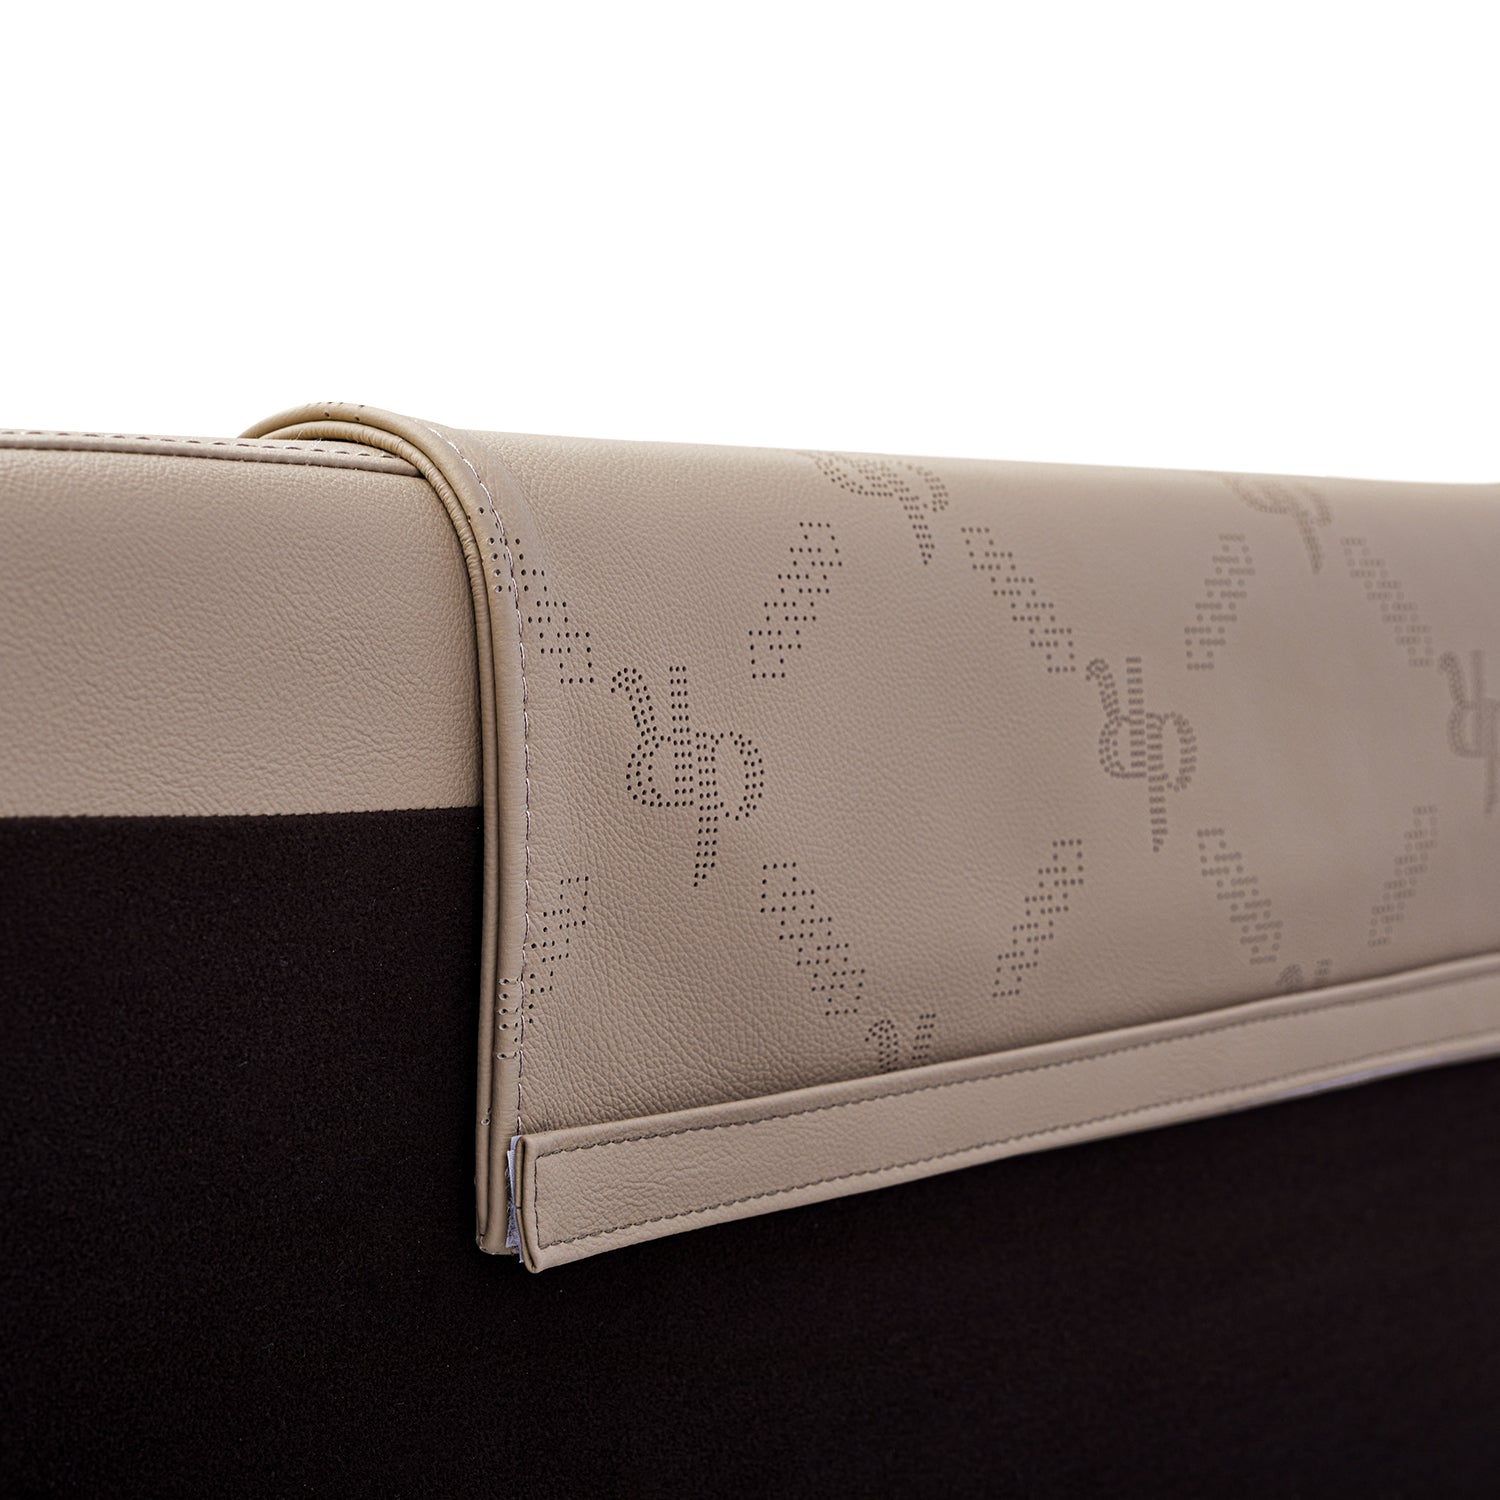 Beige leather bed frame headrest with DeRUCCI brand logo pattern and detailed stitching